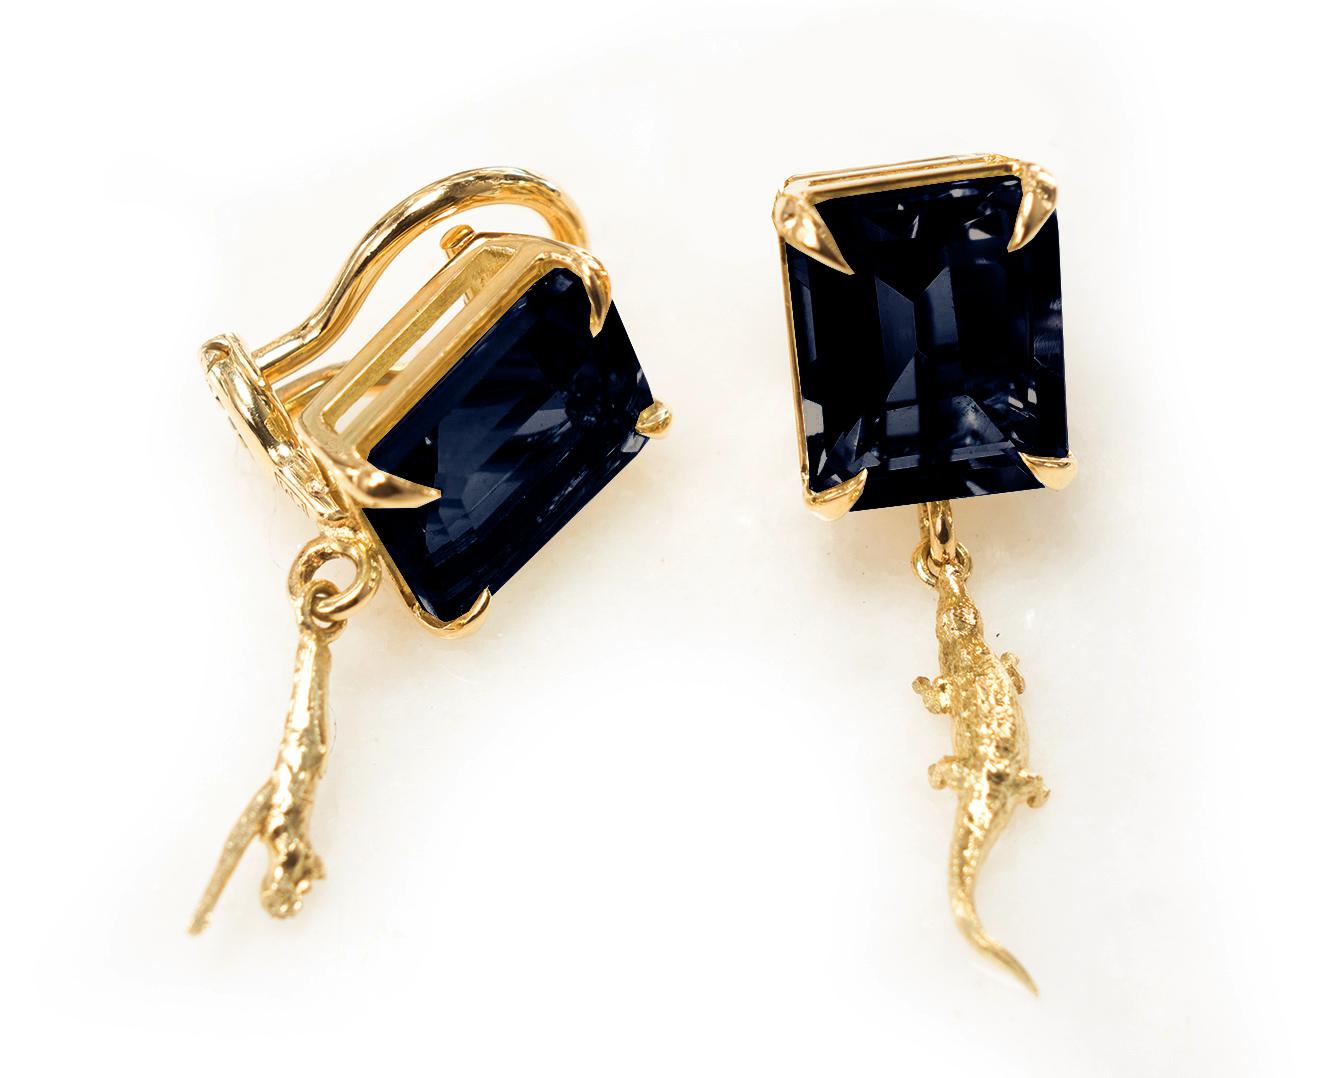 These elegant earrings with octagon-cut dark sapphires are part of the Tea collection, which was featured in Vogue UA. The earrings are crafted from 18 karat yellow gold and designed by the Berlin-based painter and jewelry designer Polya